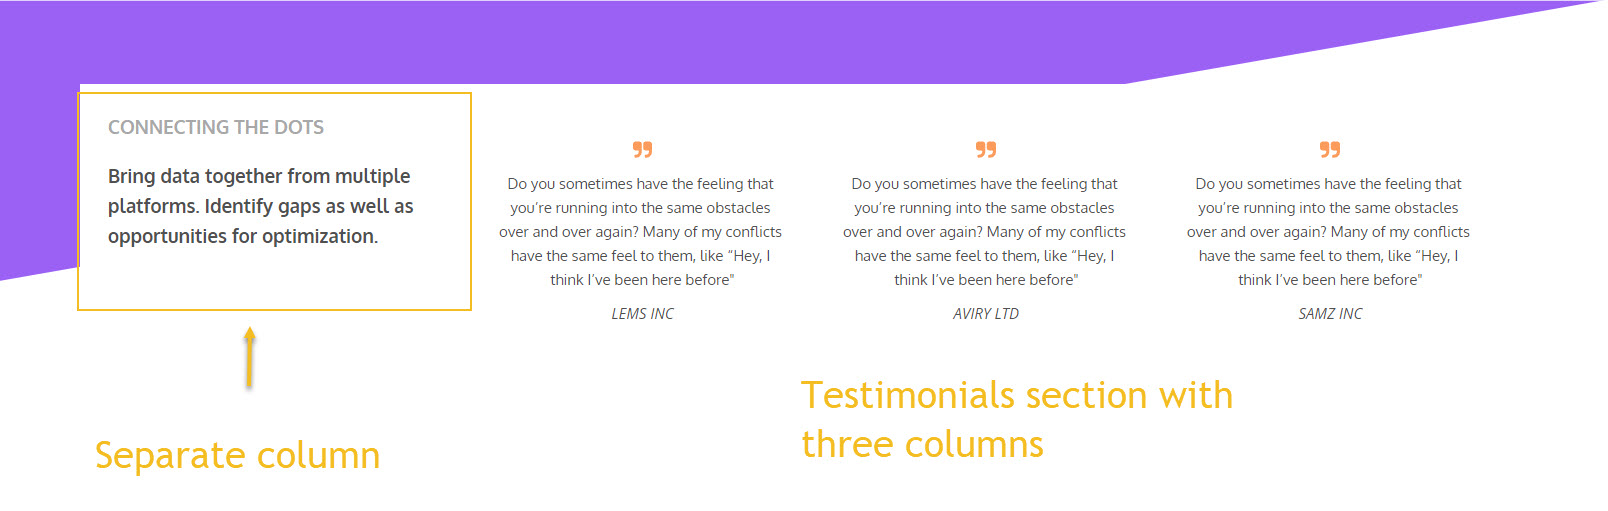 new section with text and testimonials